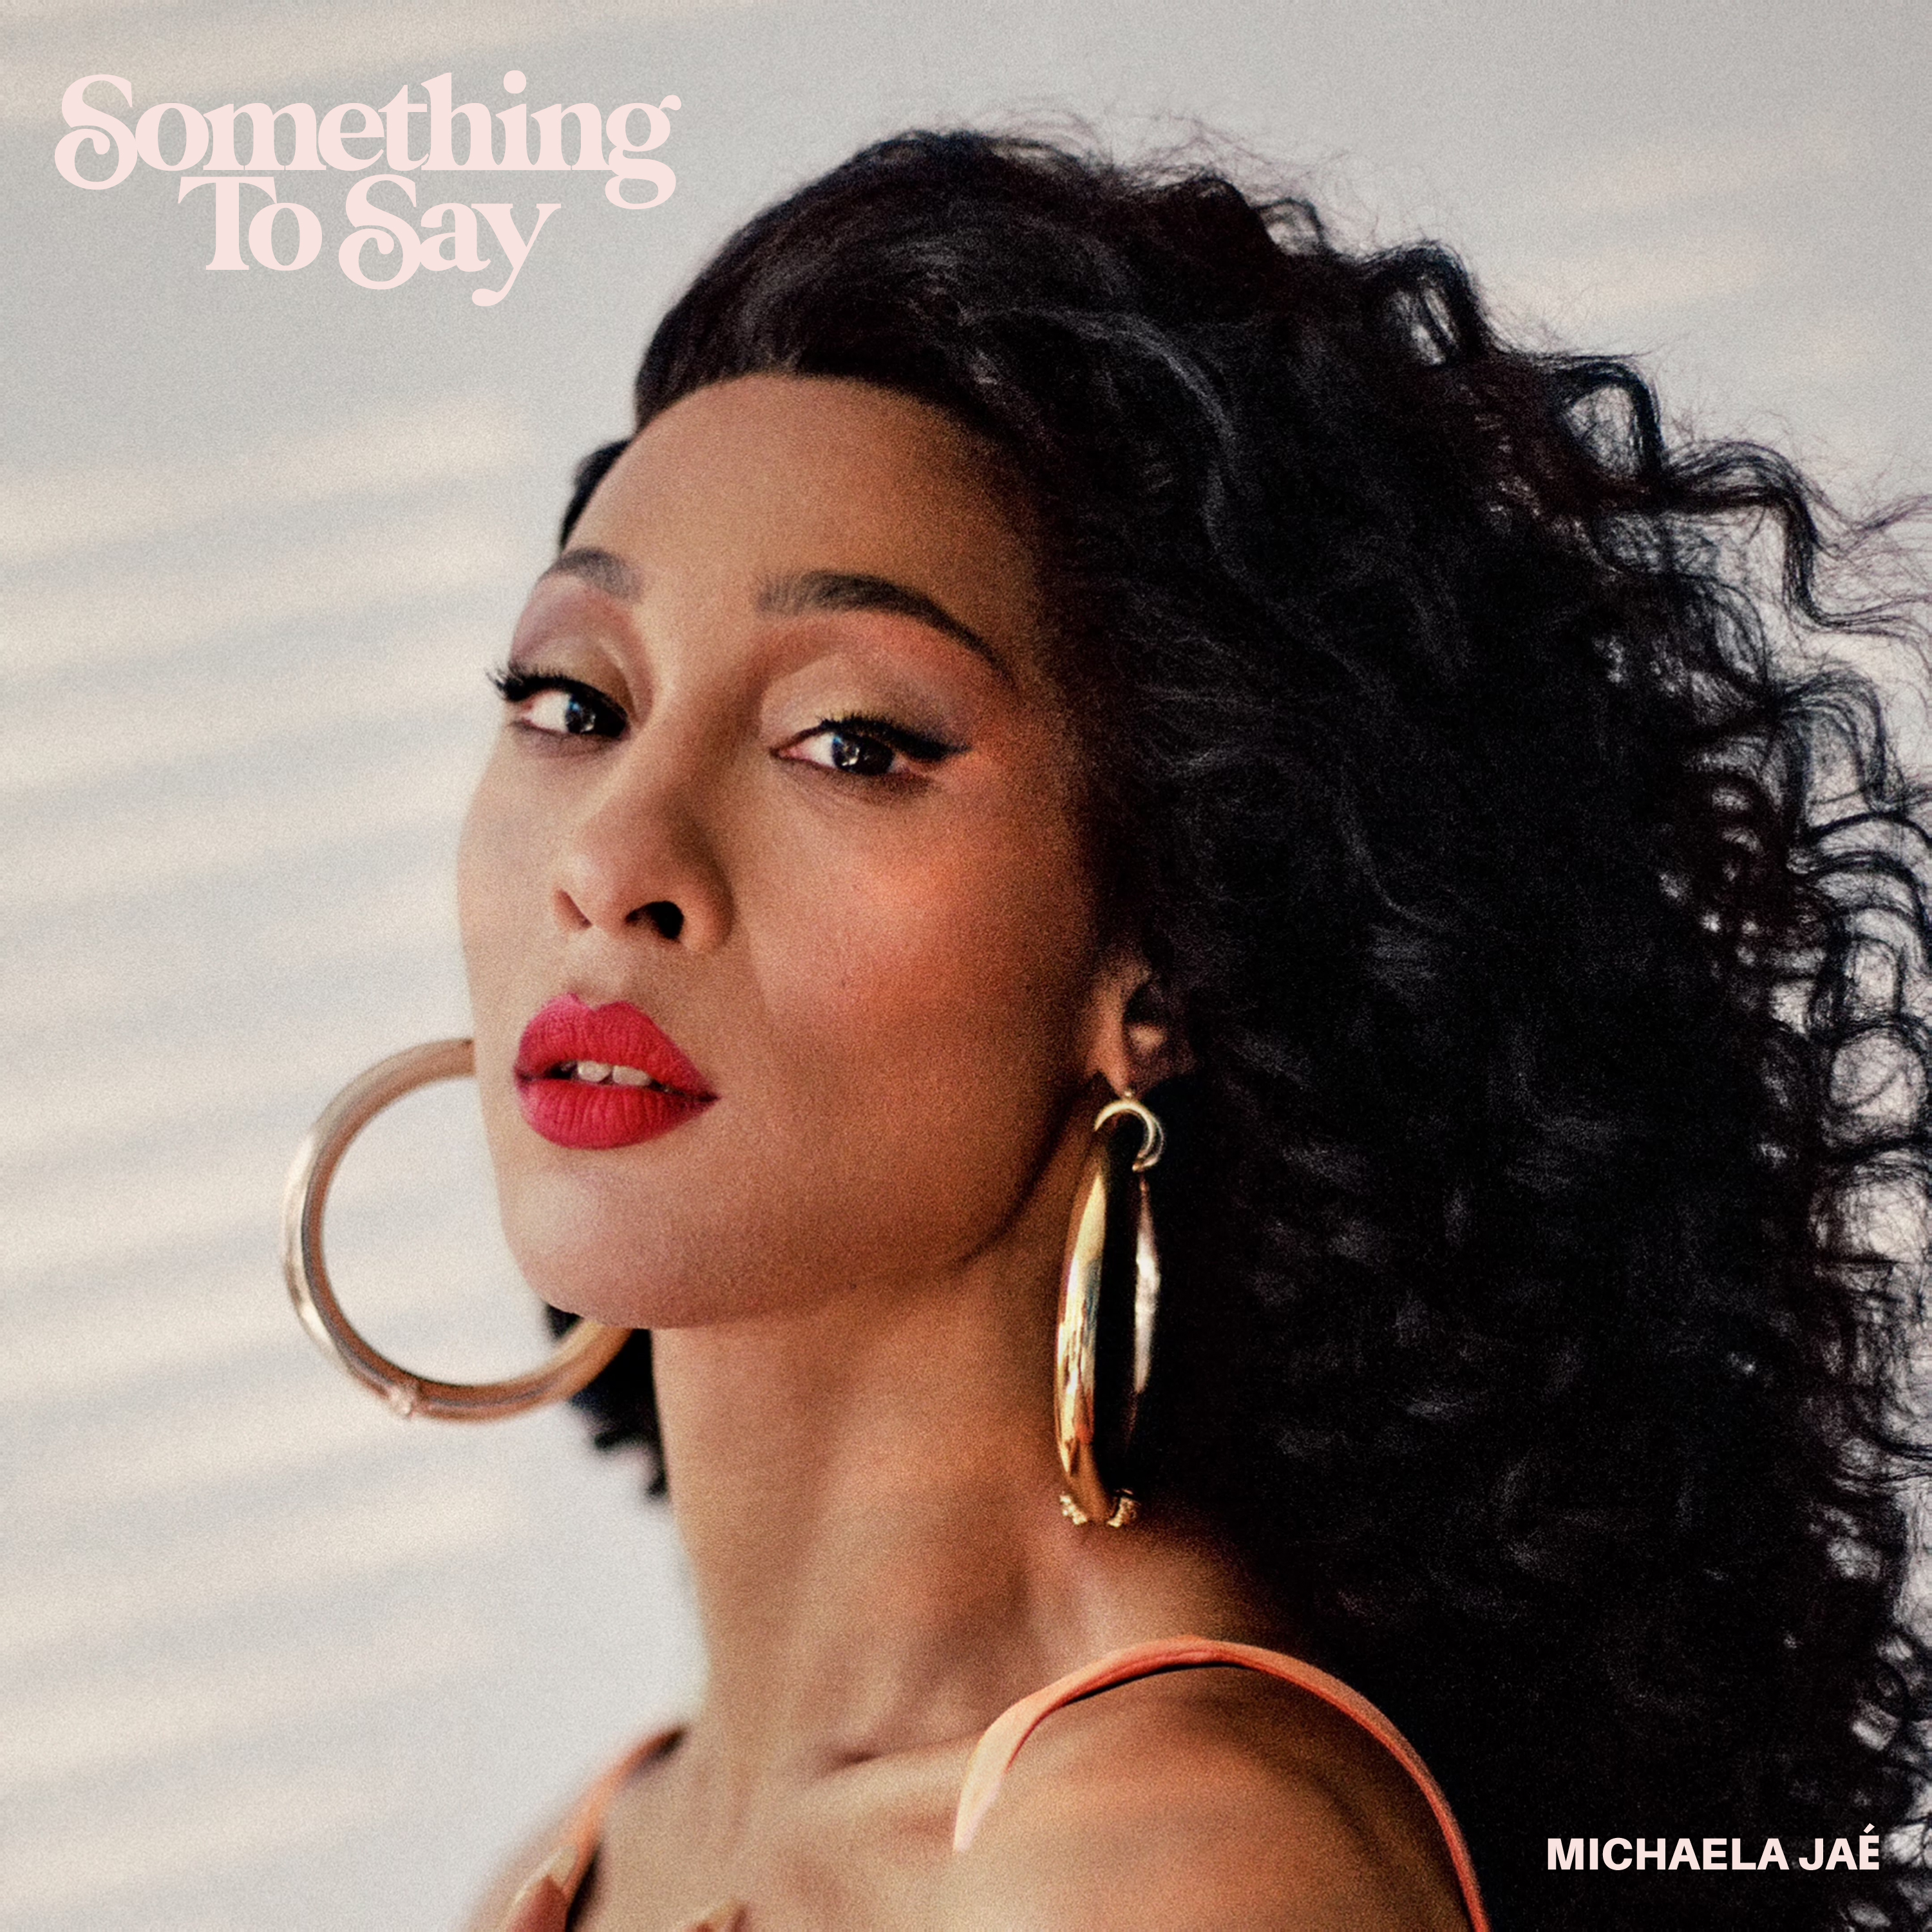 Michaela Jaé has “Something To Say” on Empowering Debut Single